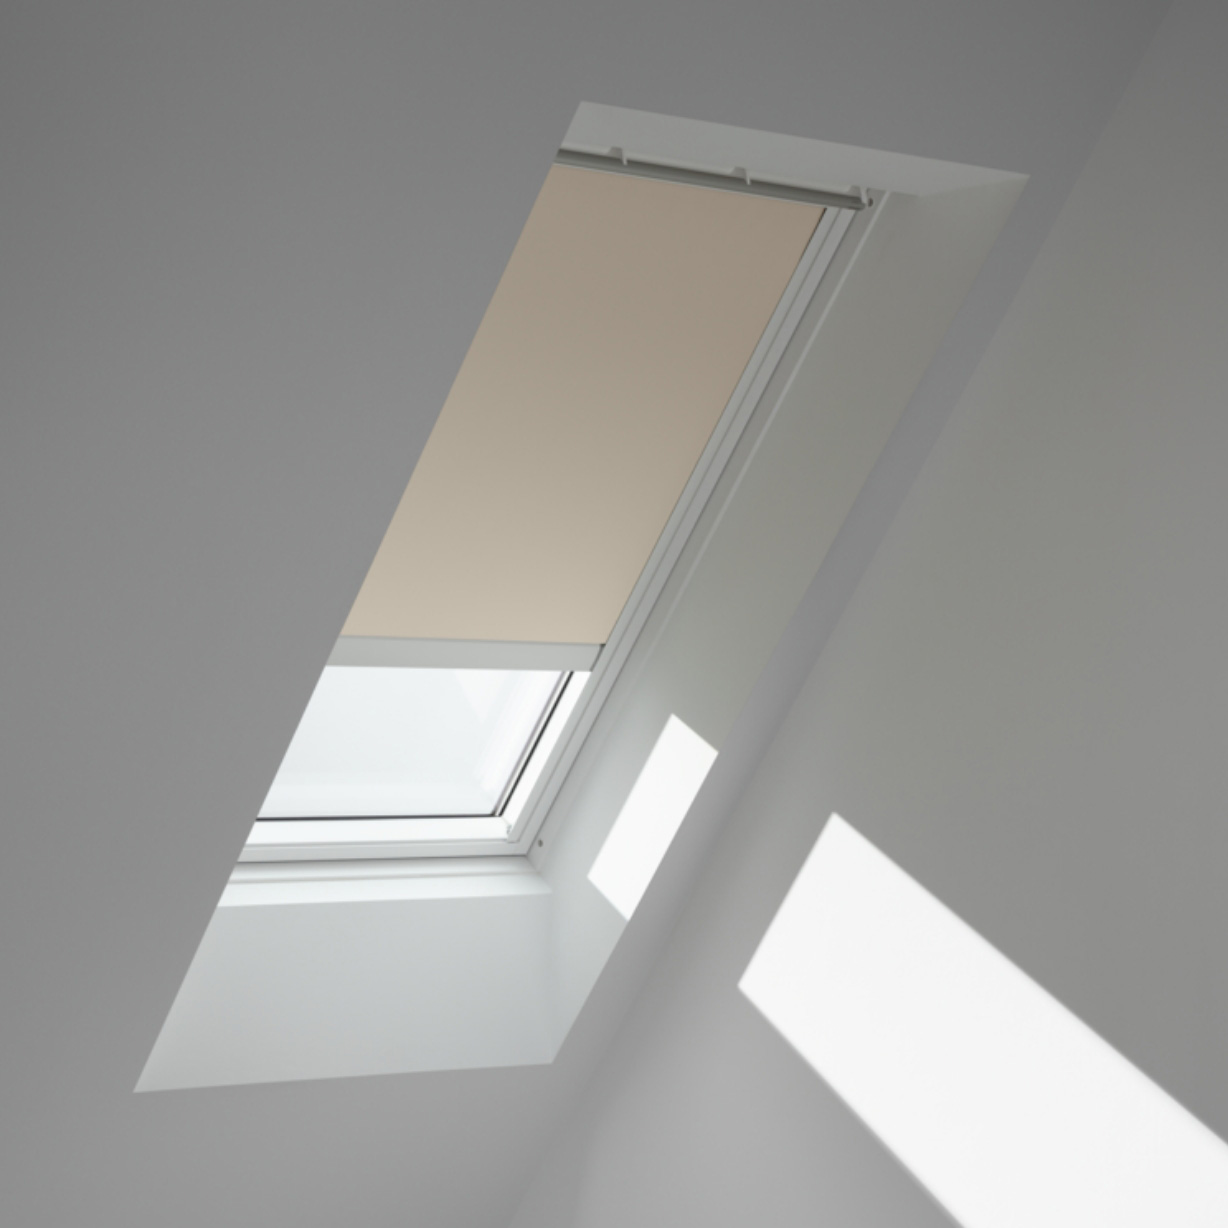 Close up of cream white Velux blinds